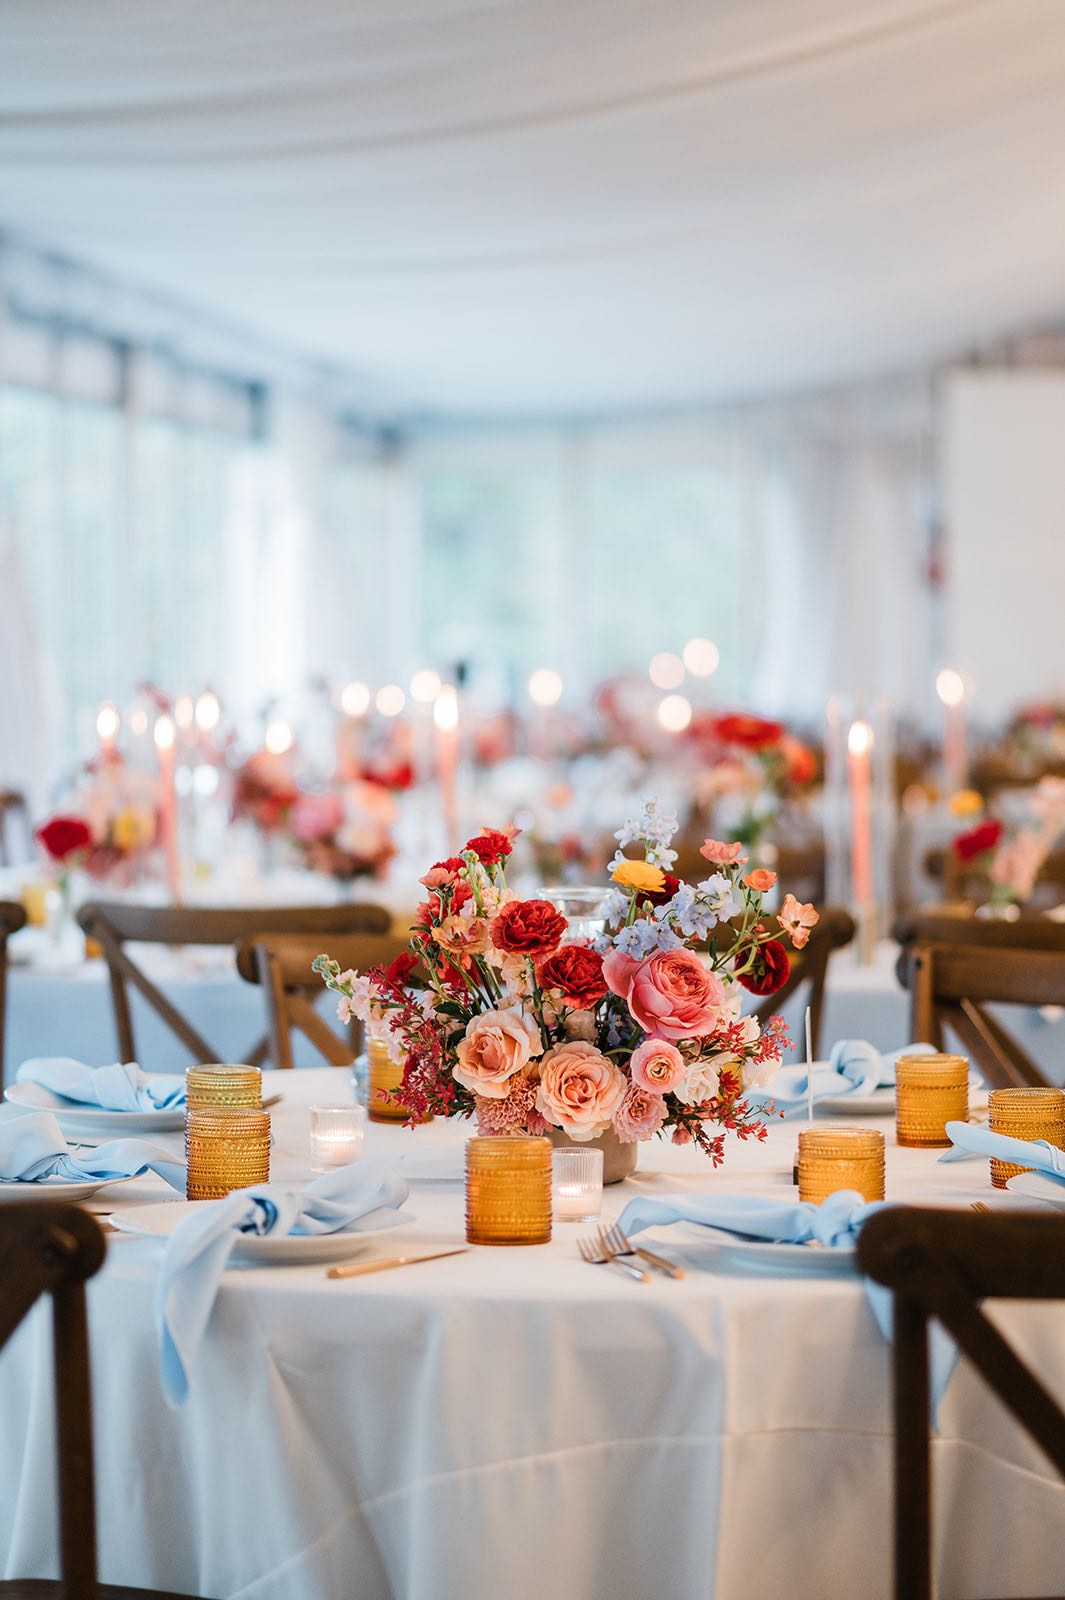 Wedding reception decor with white linen, blue napkins, peach, yellow, red and blush flowers. 